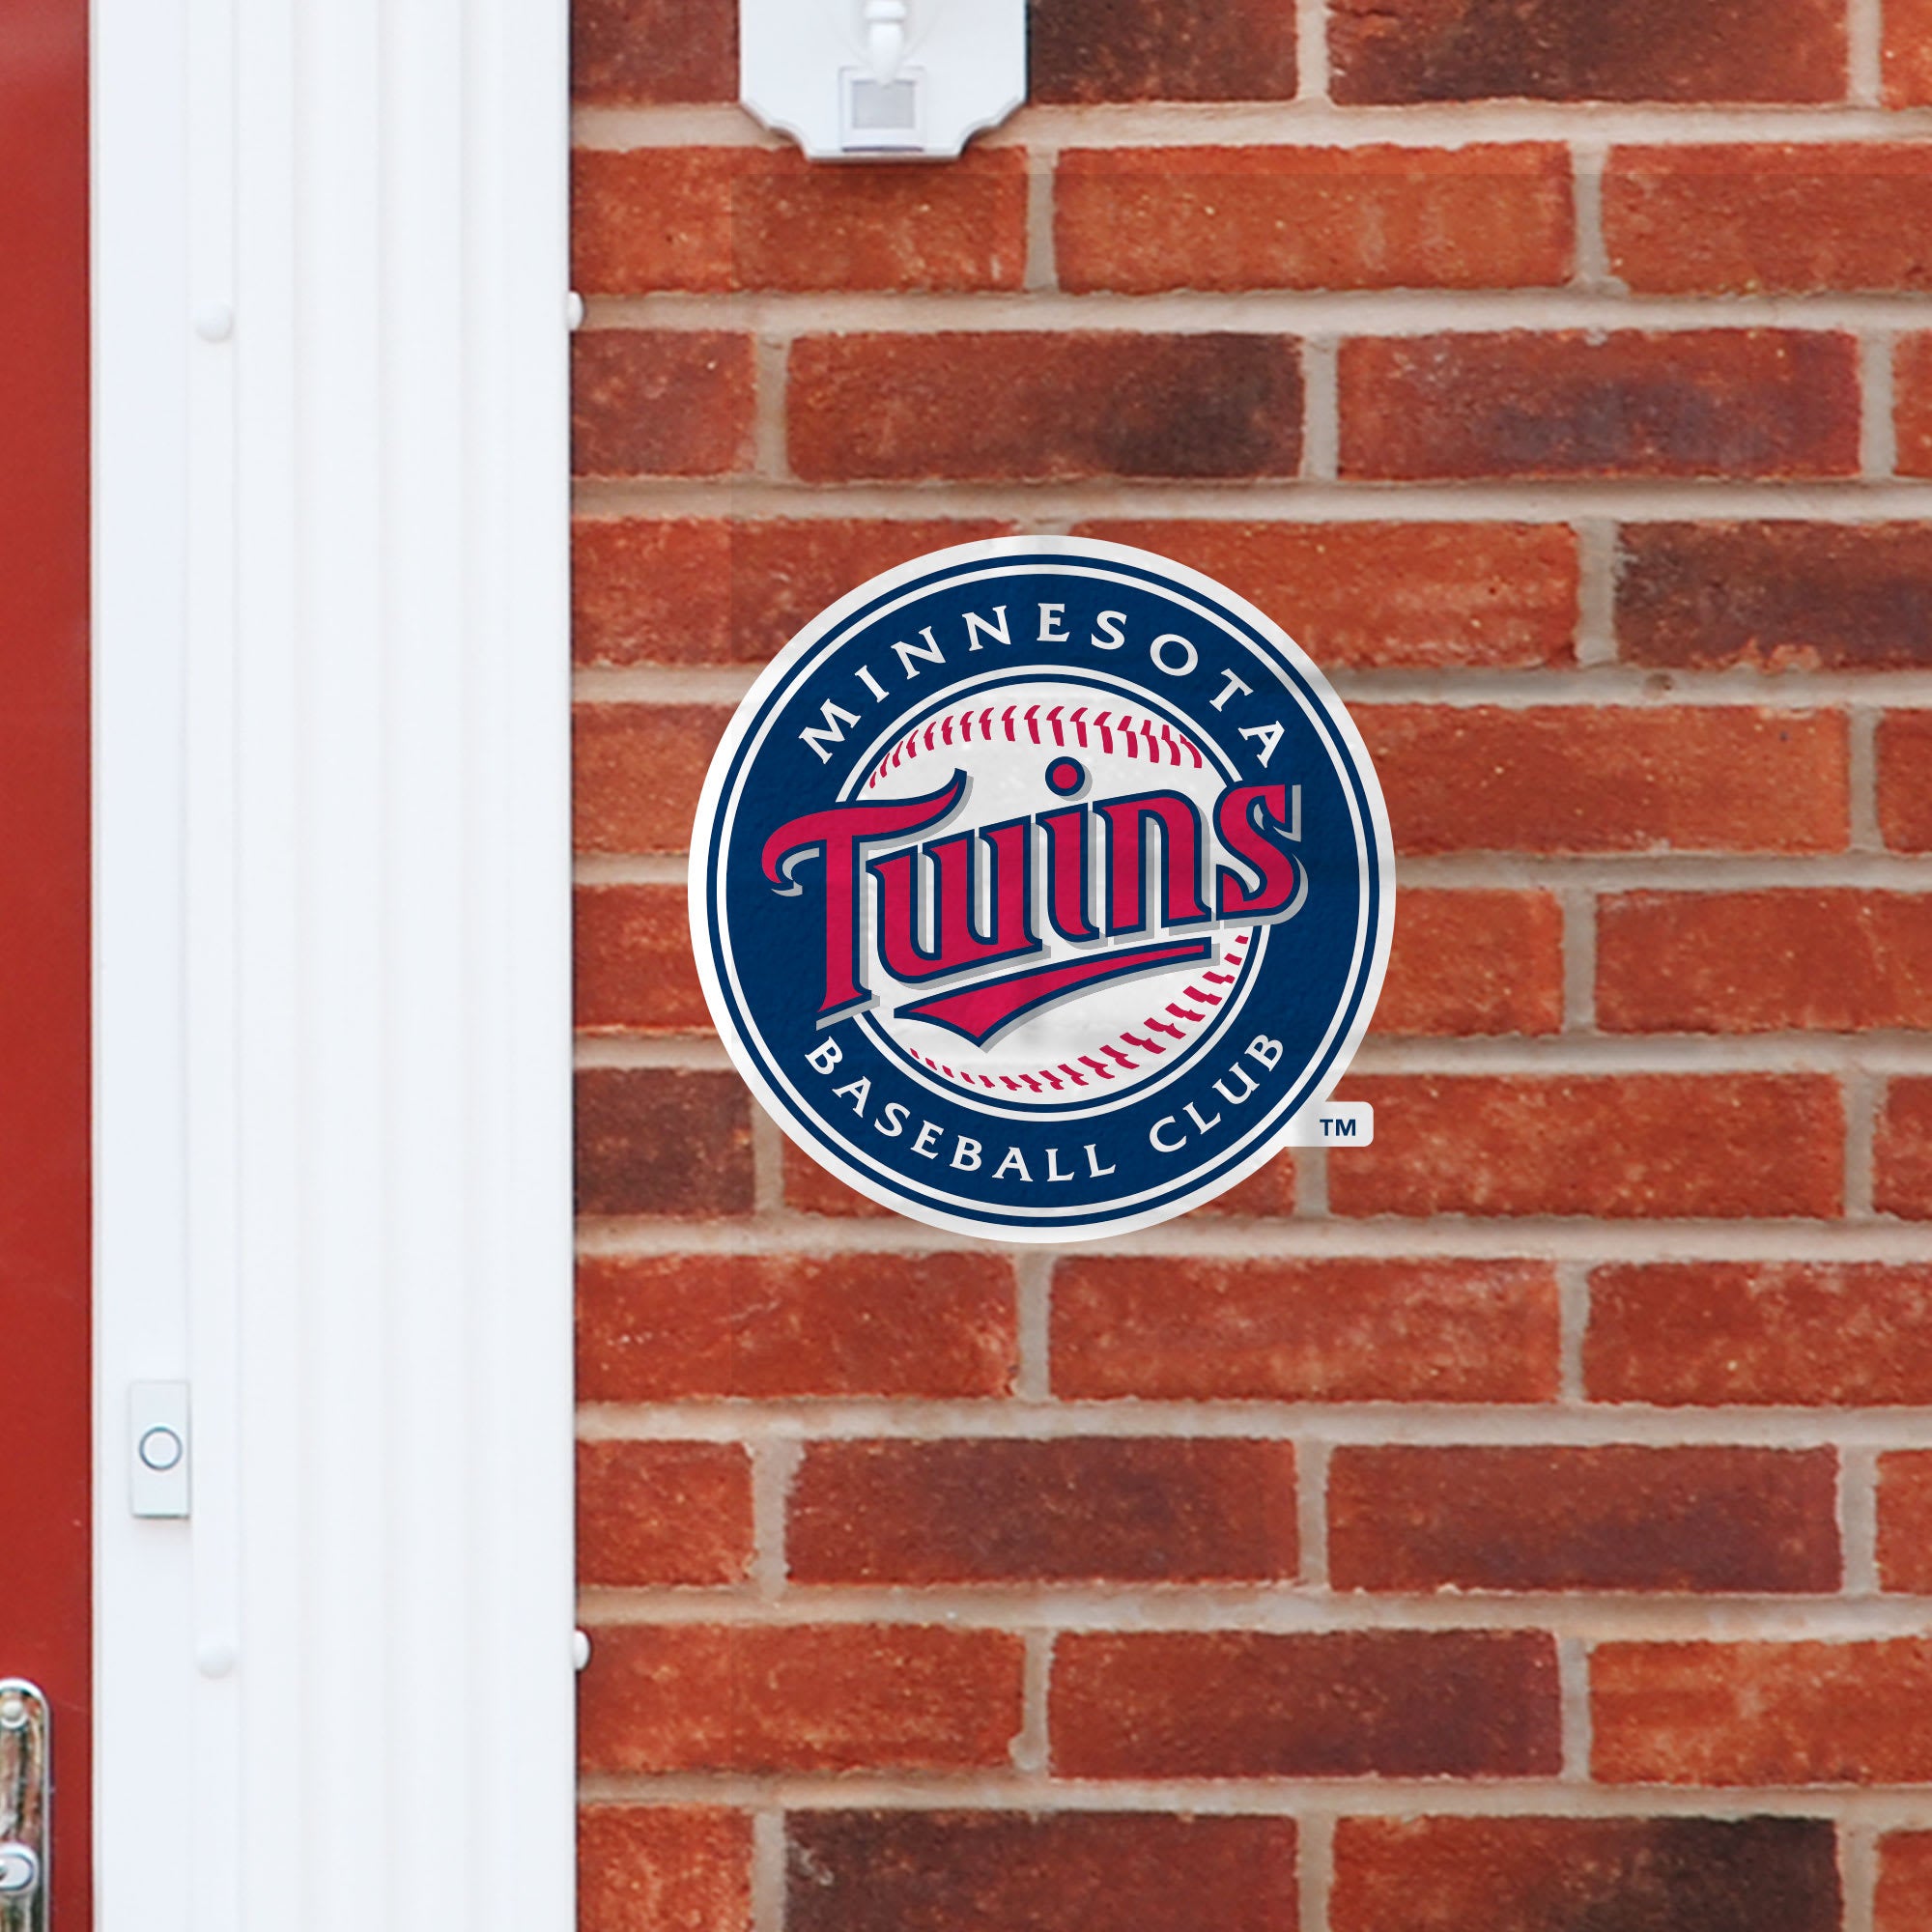 Minnesota Twins: Logo - Officially Licensed MLB Outdoor Graphic Large by Fathead | Wood/Aluminum